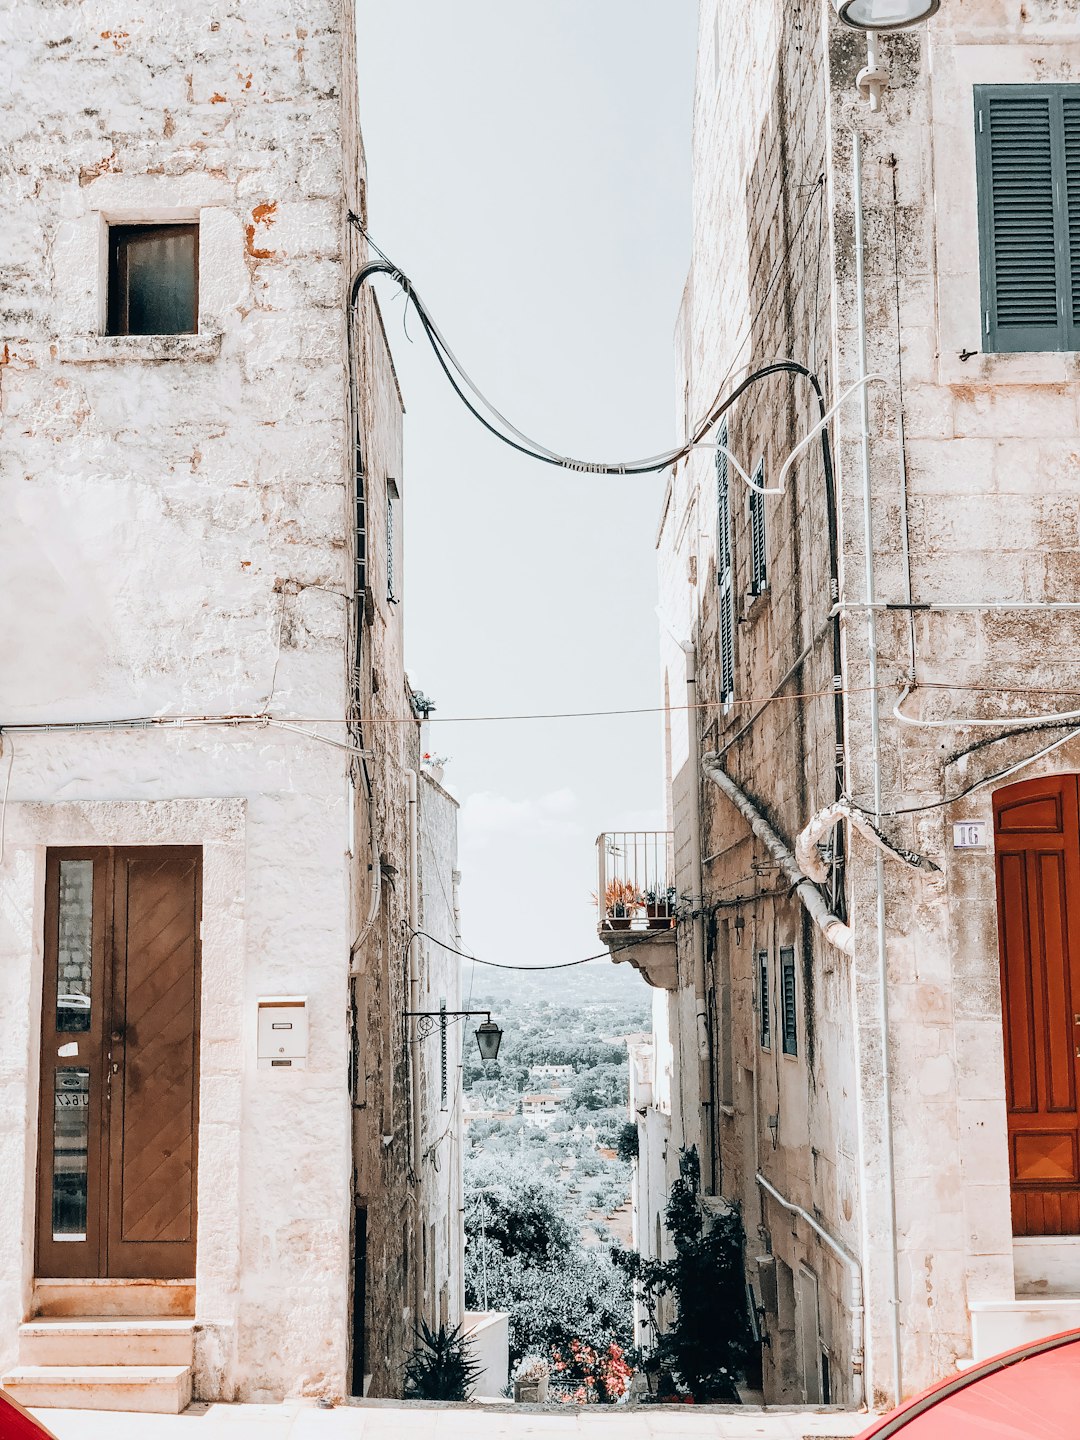 travelers stories about Town in Cisternino, Italy